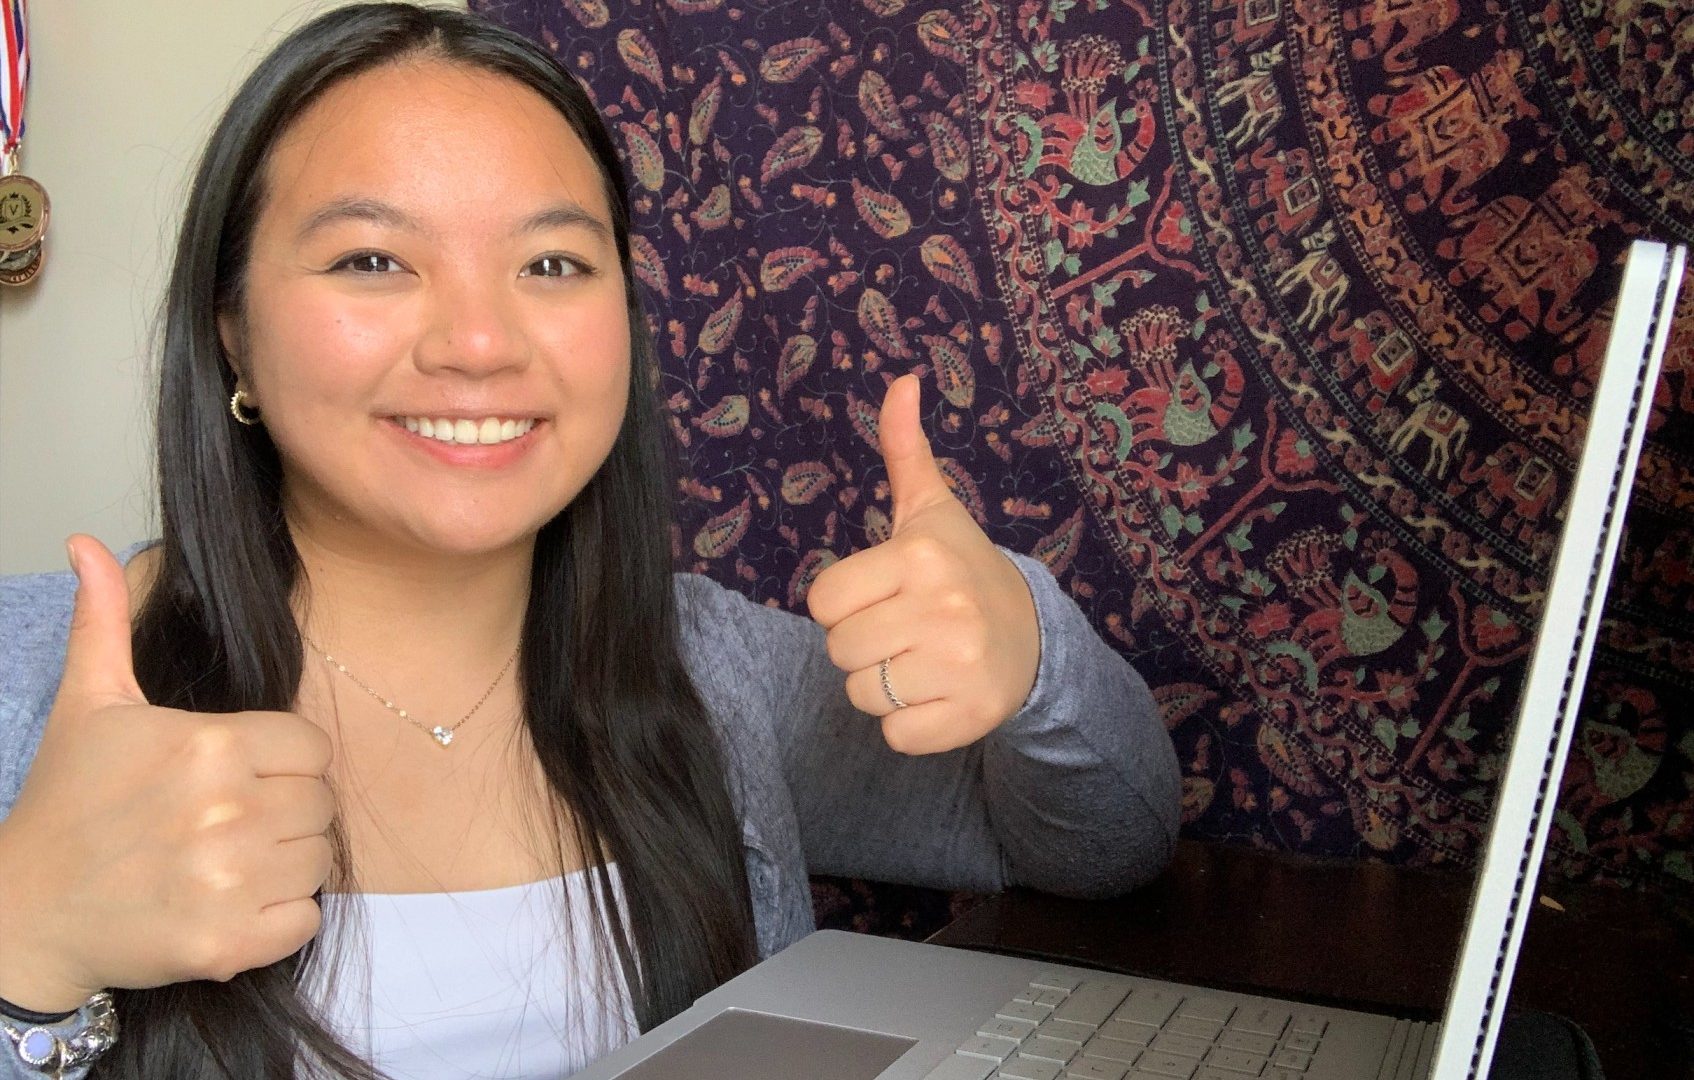 Jessica smiling with two thumbs up infront of her computer